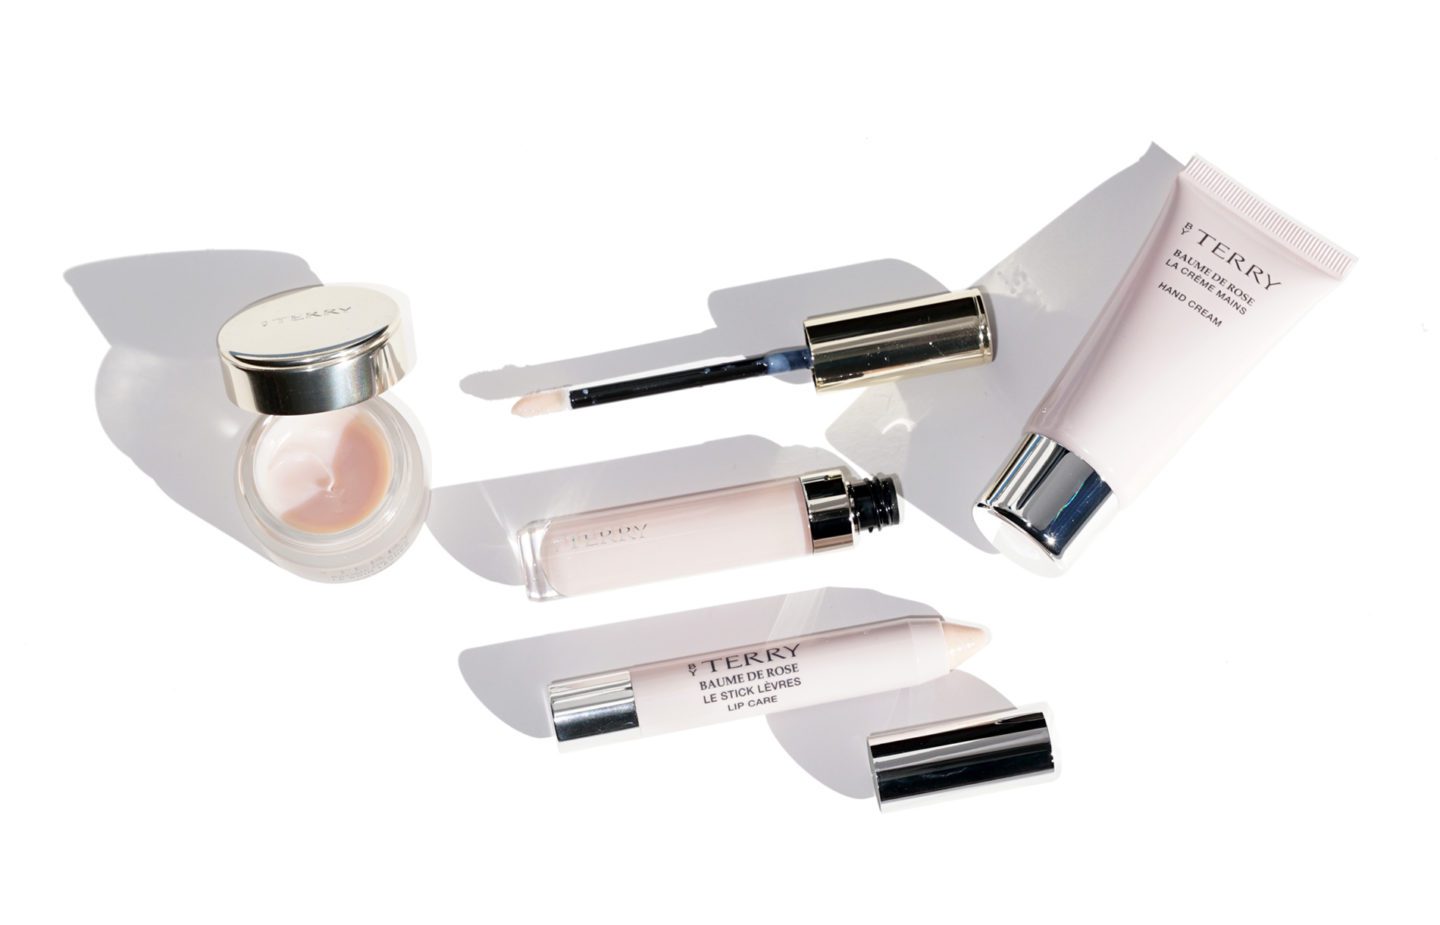 By Terry Baume de Rose Review and Overview, Original, Crystalline, Le Stick and Hand Cream